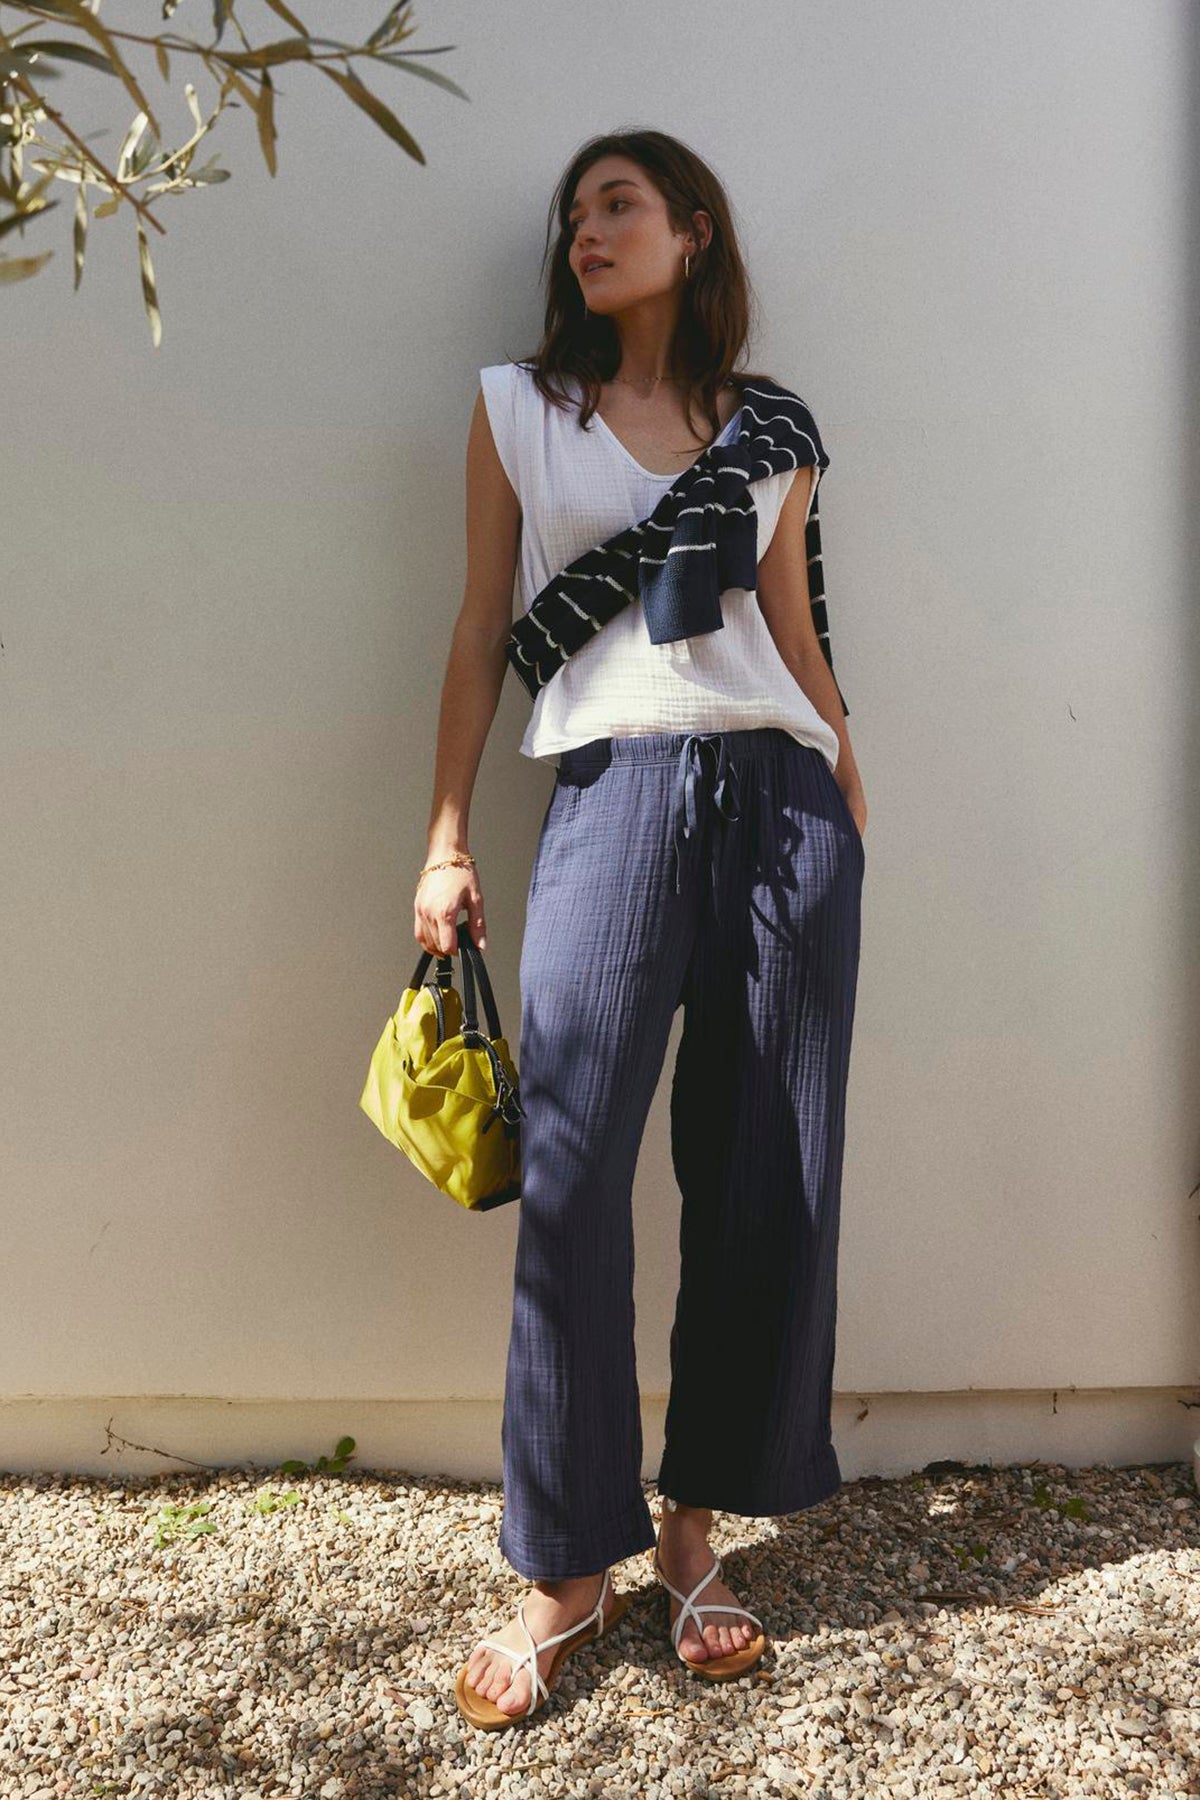 Woman standing in sunlight leaning against a wall, wearing a CHAYSE STRIPED CREW NECK SWEATER sweater from Velvet by Graham & Spencer, striped pants, and sandals, holding a green bag in a relaxed silhouette.-36443581743297